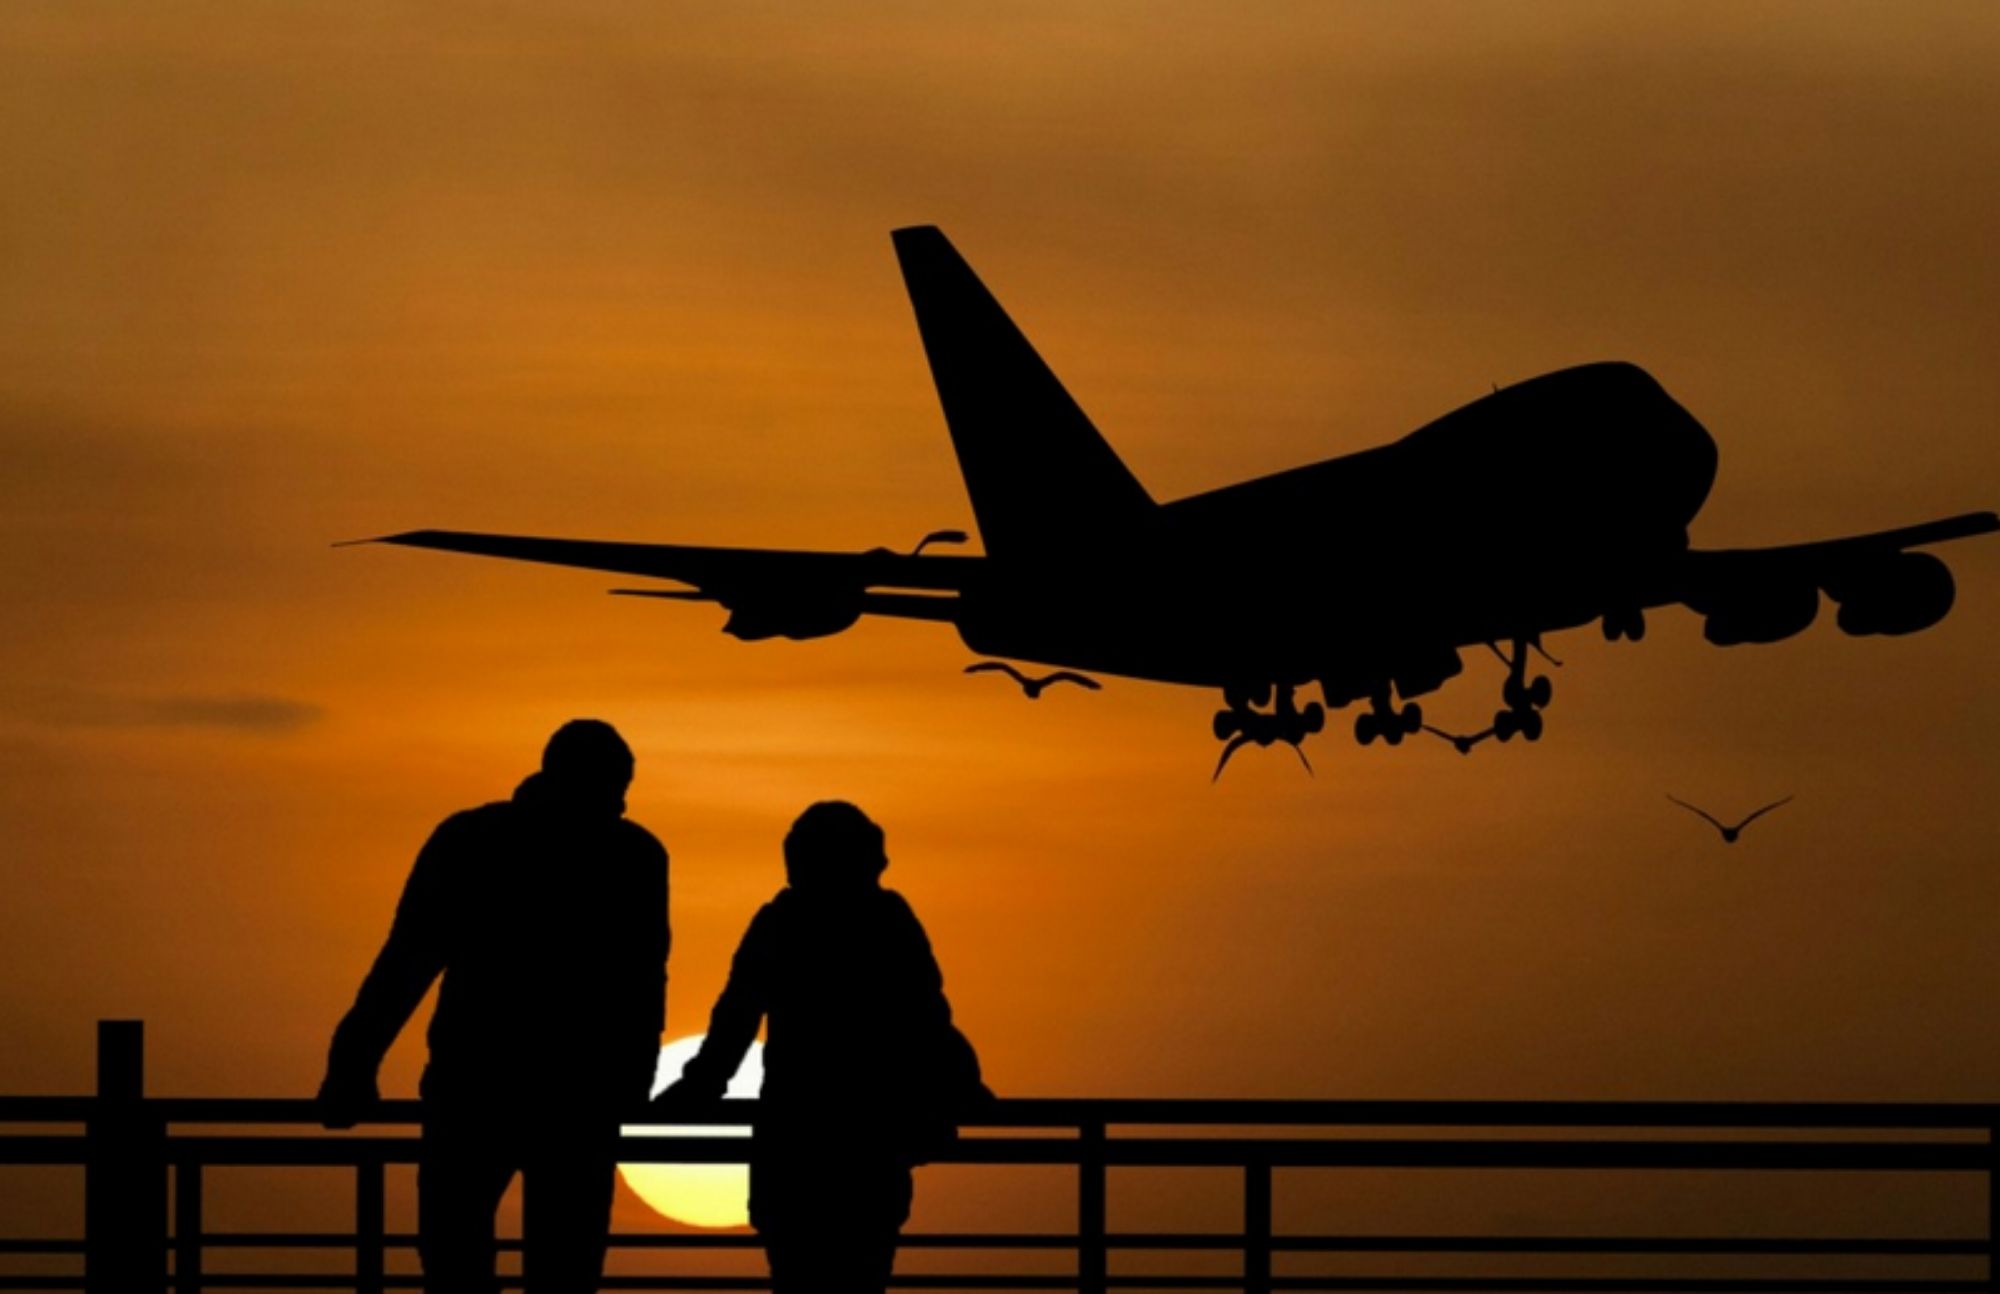 A couple and an airplane in the air in a silhouette shot